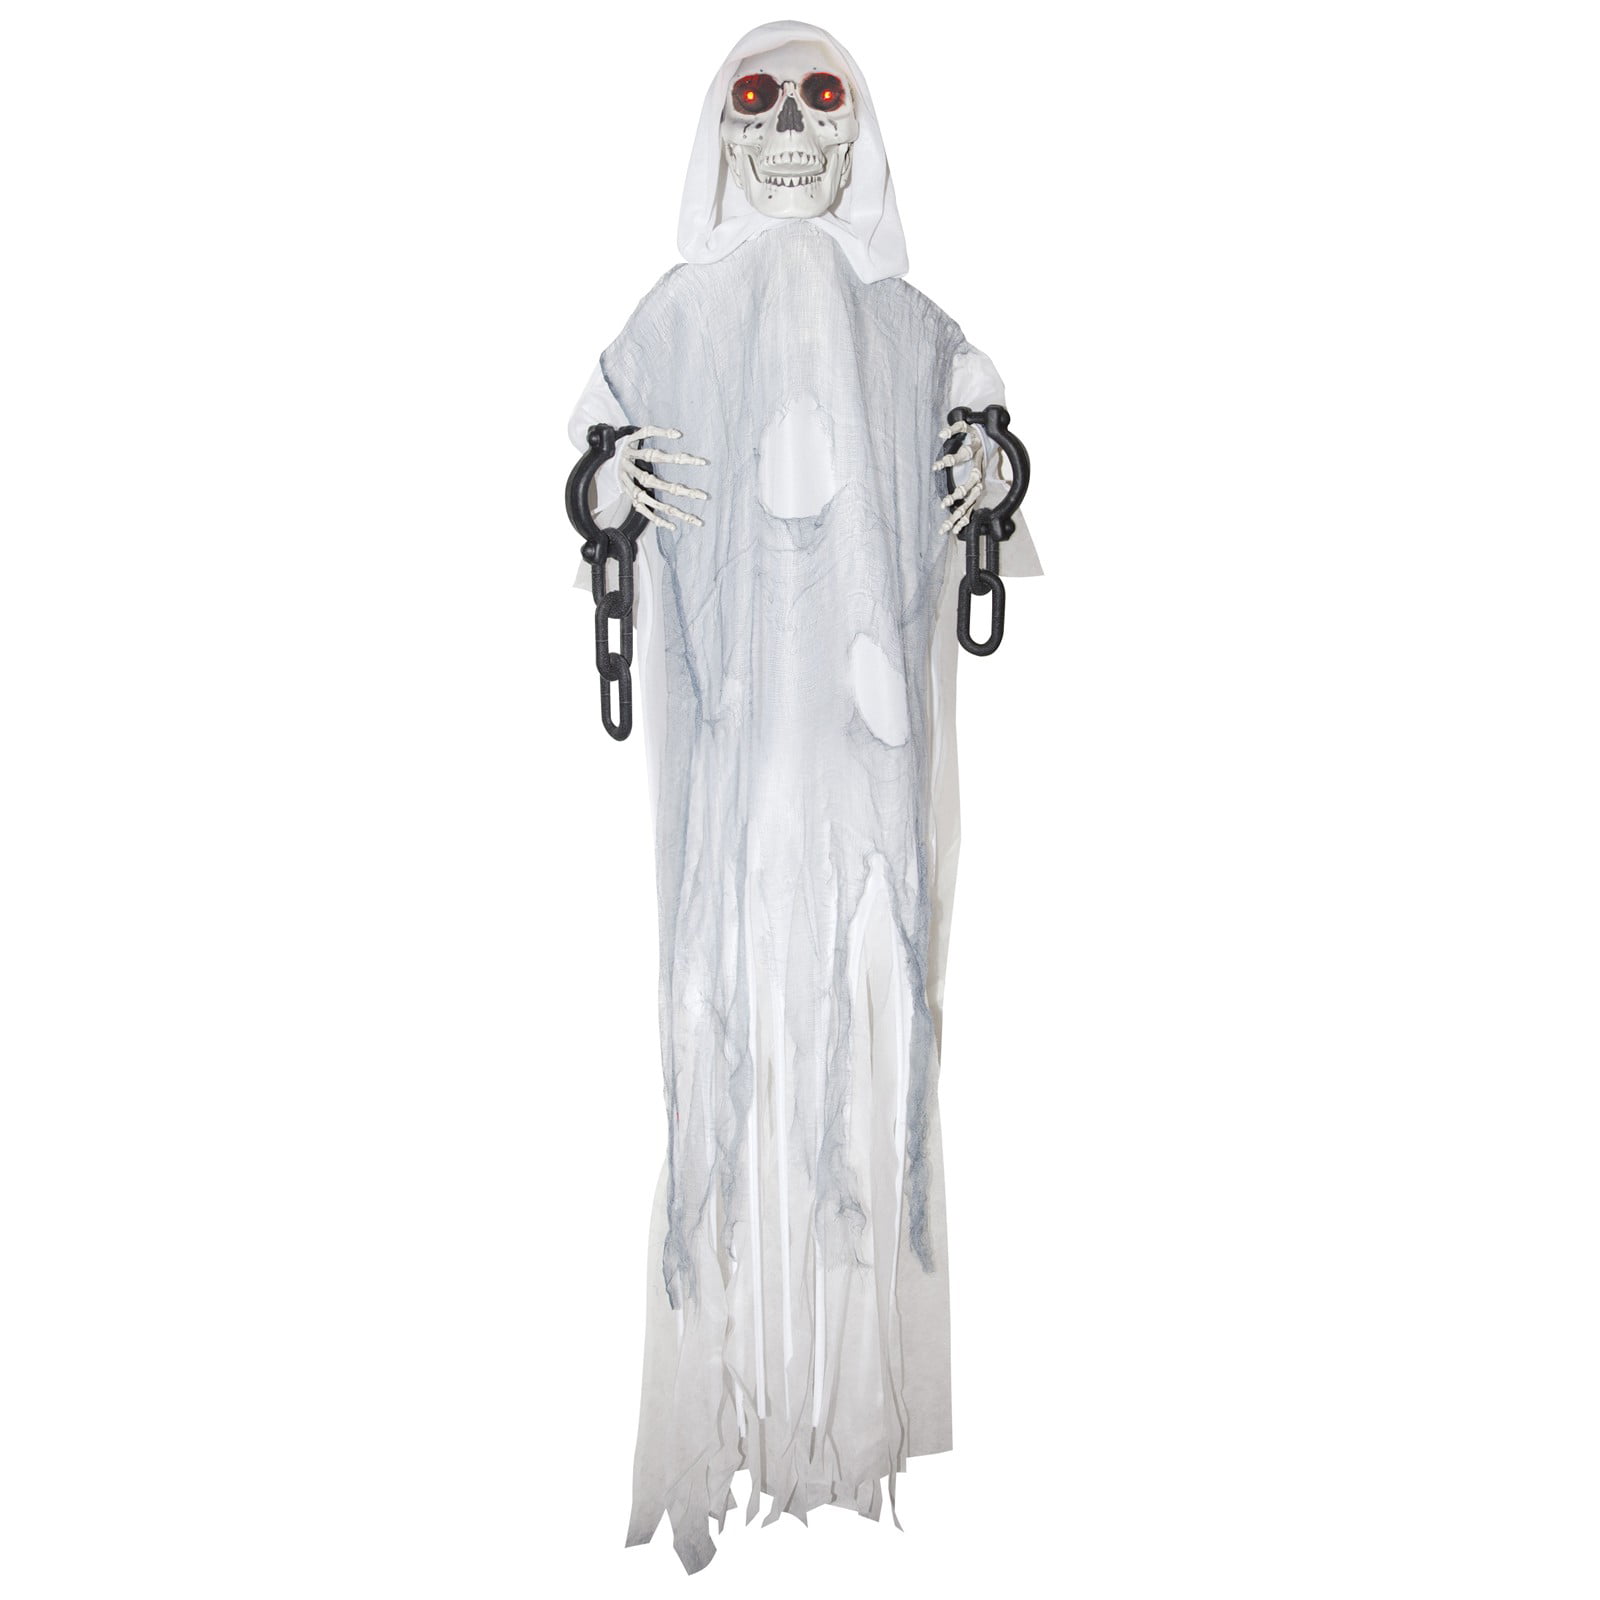 Animated Hanging White Reaper in Chains - Walmart.com